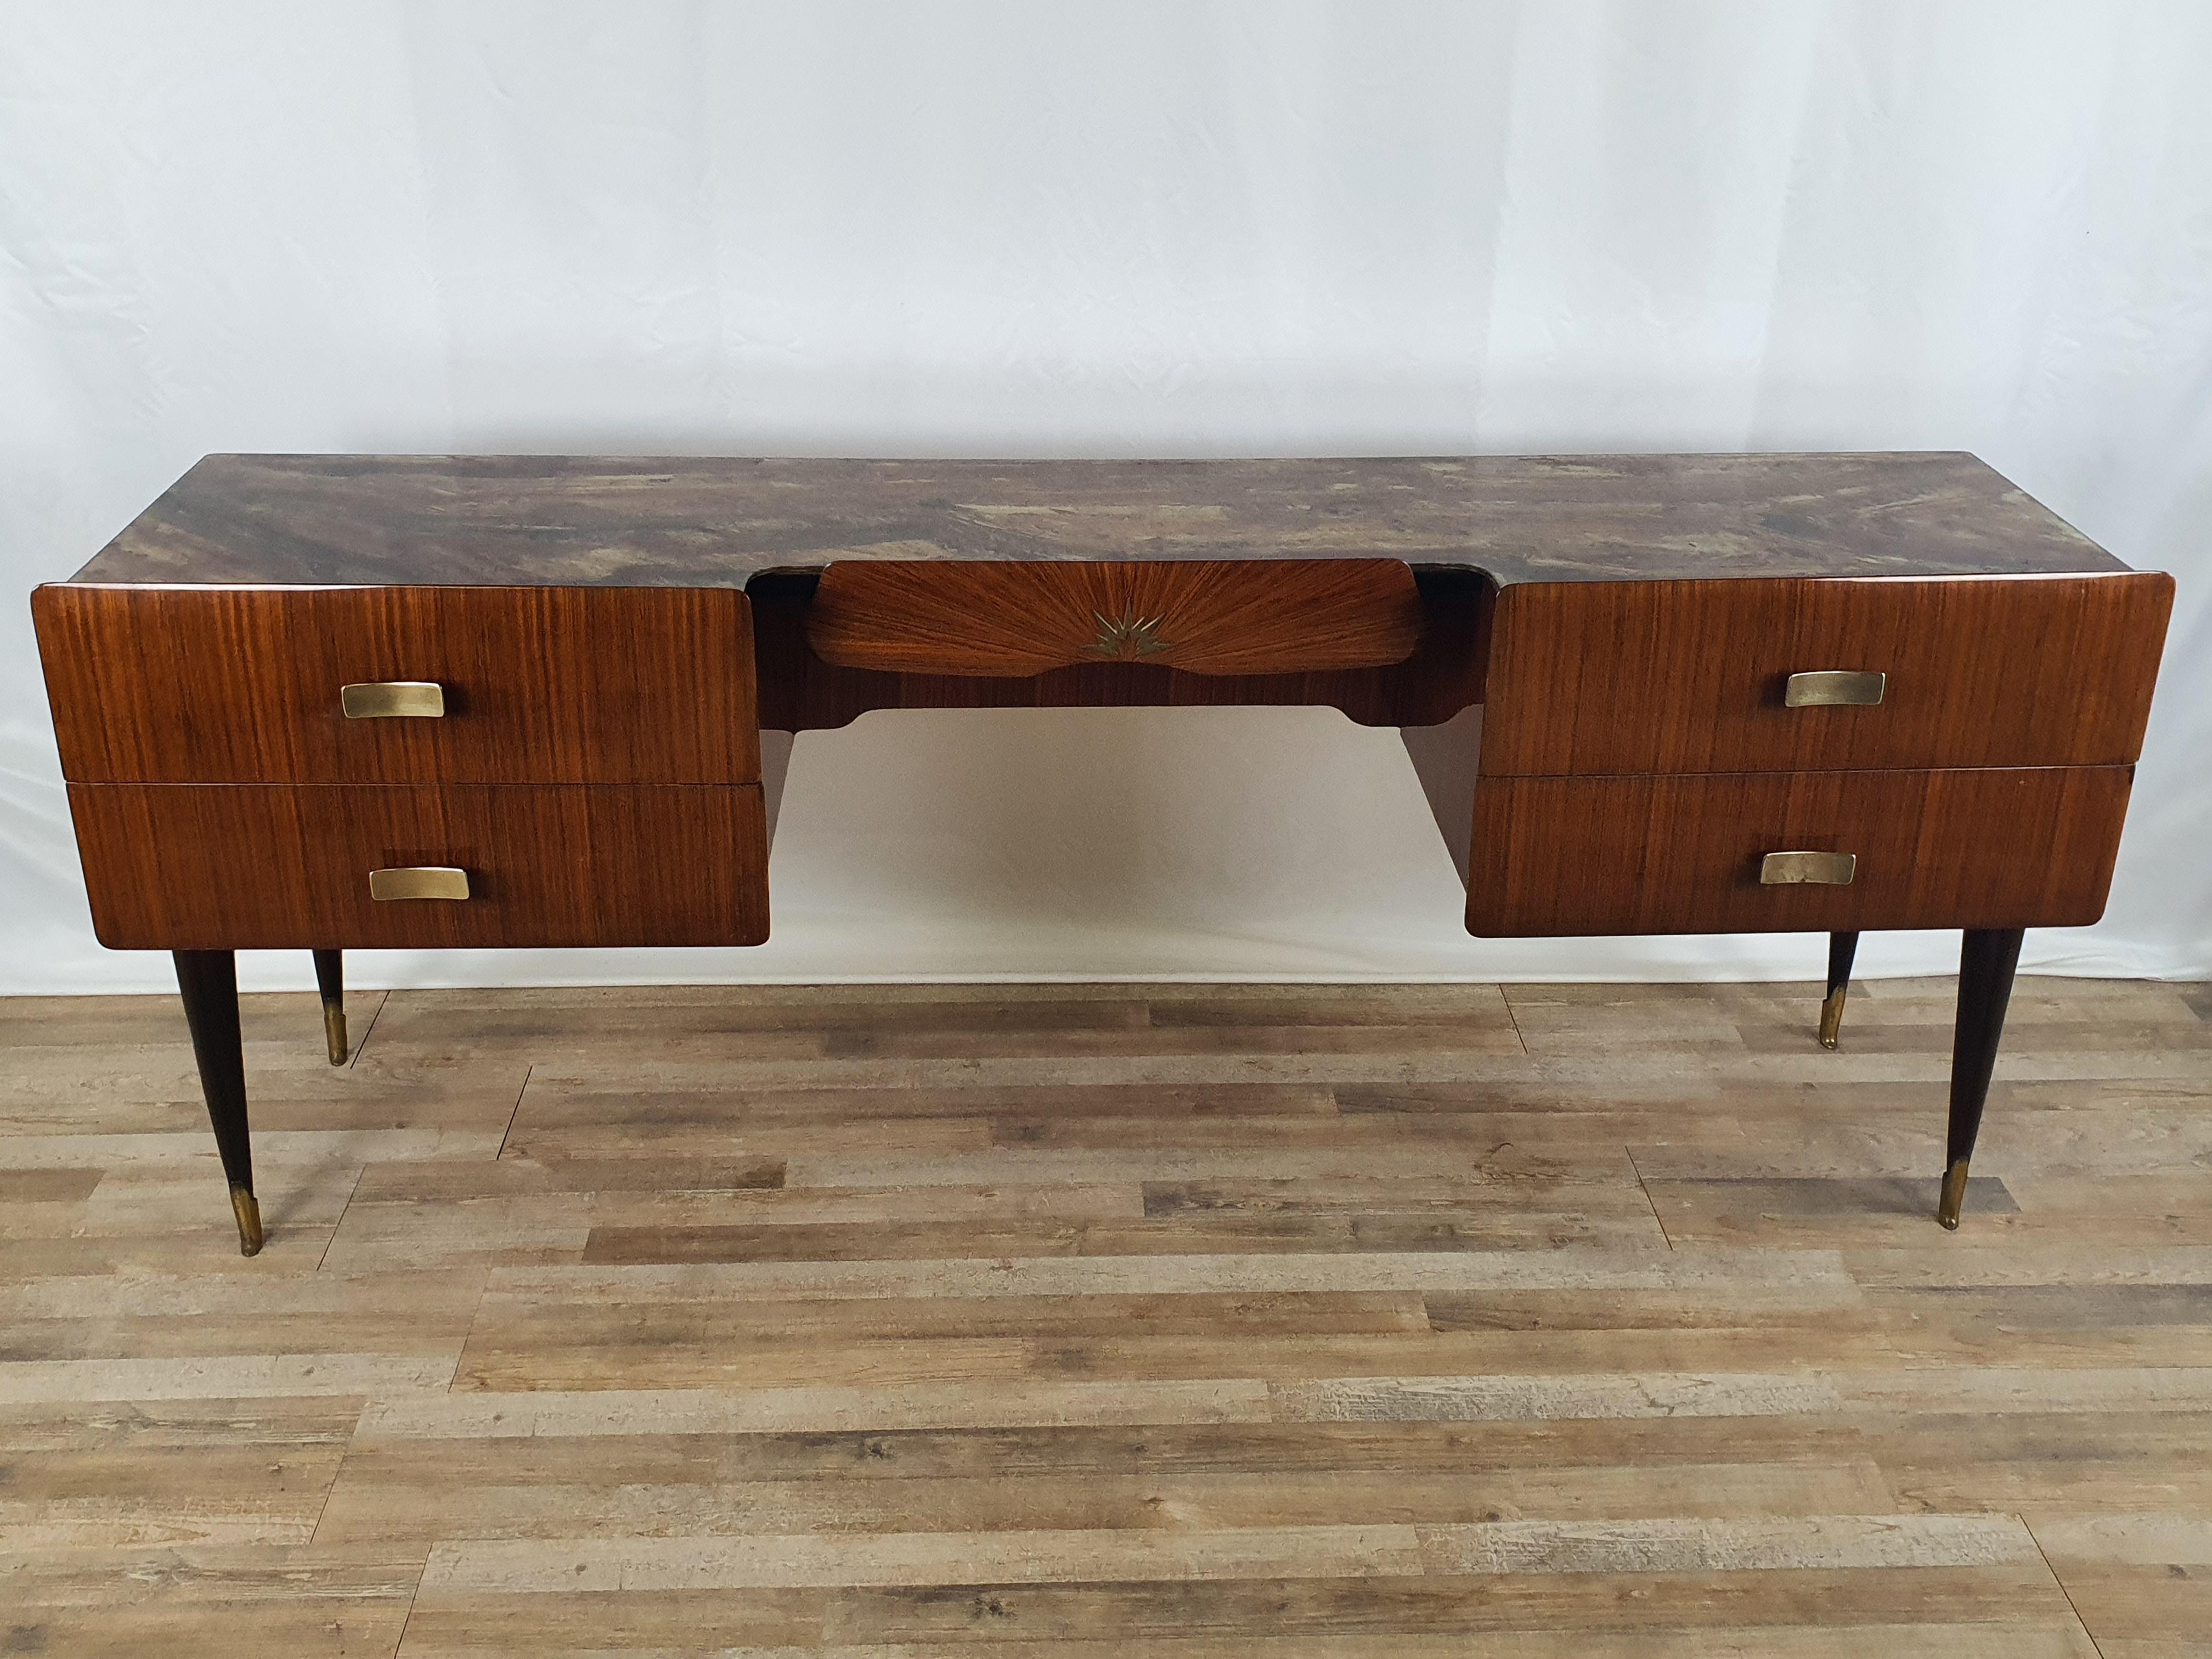 Chic midcentury Italian chest of drawers circa 1950 in mahogany with brass trim and handles.

Note the glass placed on the main floor, original of the period, as it gives refinement and particularity to the piece of furniture to make it suitable